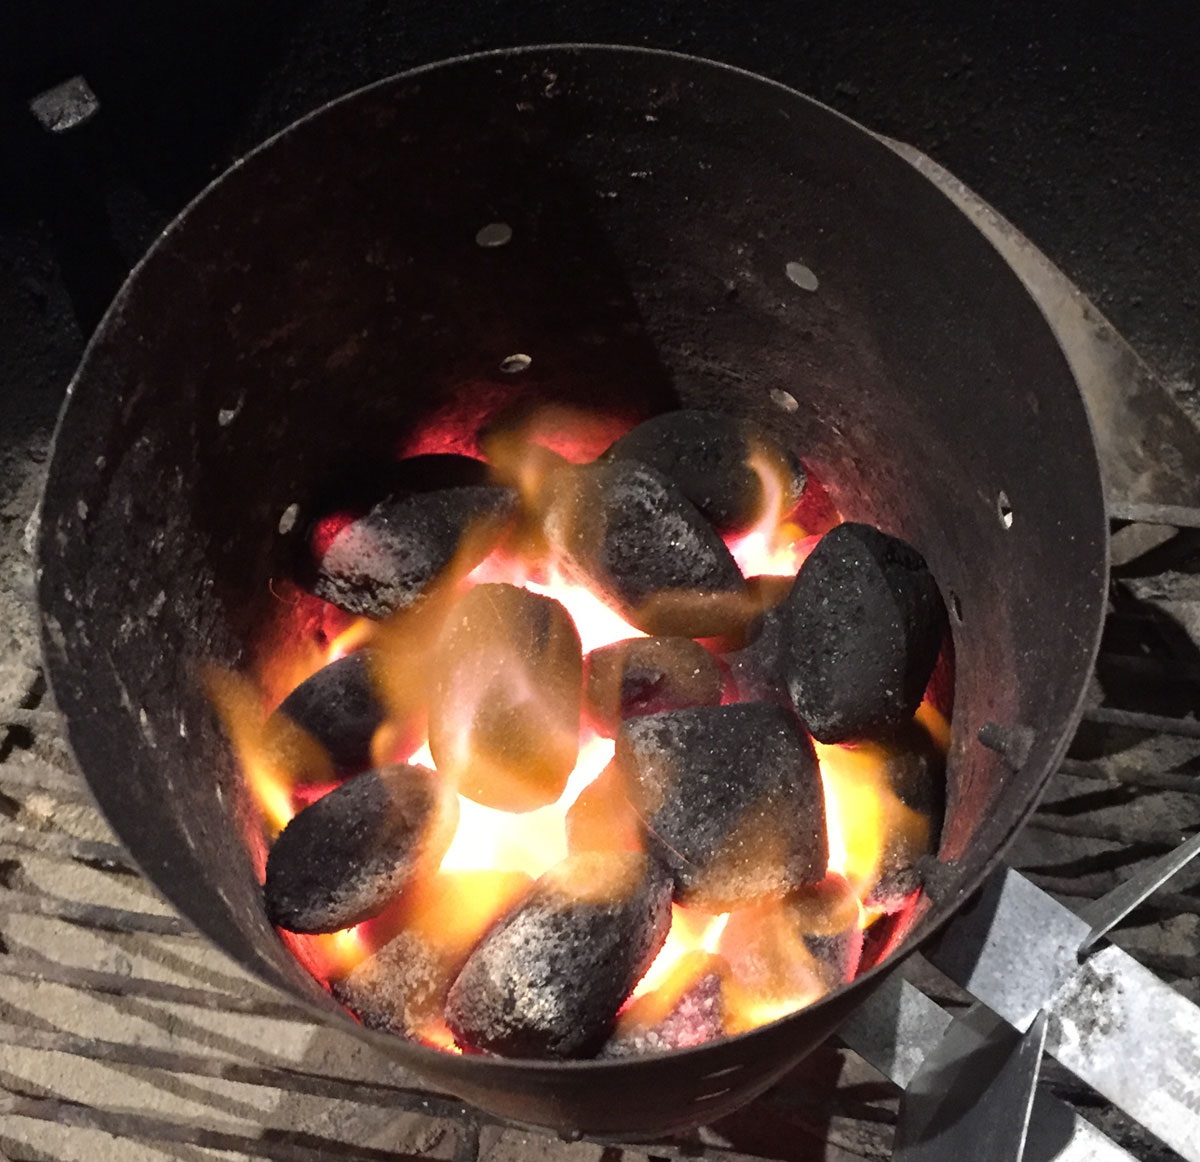 Heat up charcoal and preheat barbecue.